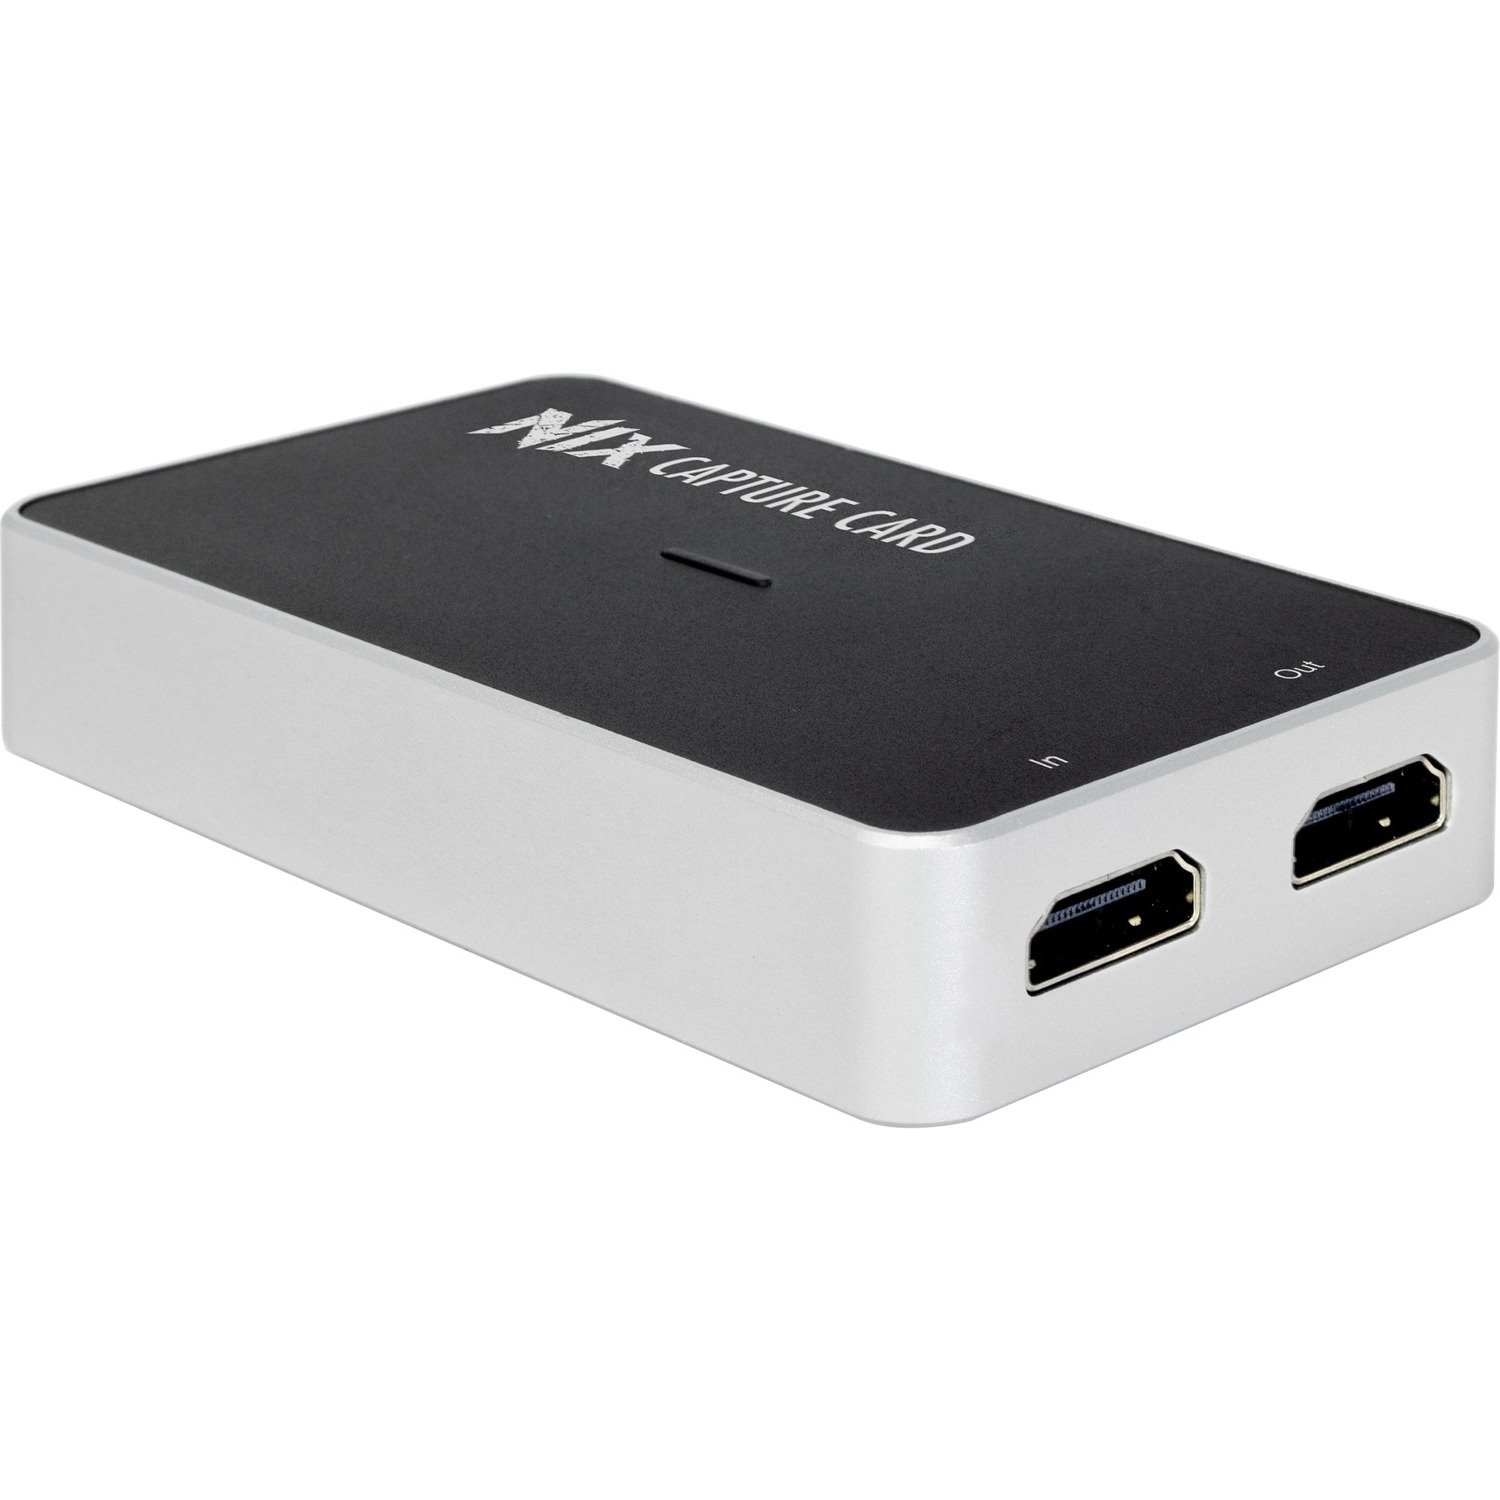 Plugable HDMI Capture Card USB 3.0 and USB-C, Record, Stream and Go Live with DSLR, 1080P 60FPS, HDMI Passthrough for Monitor